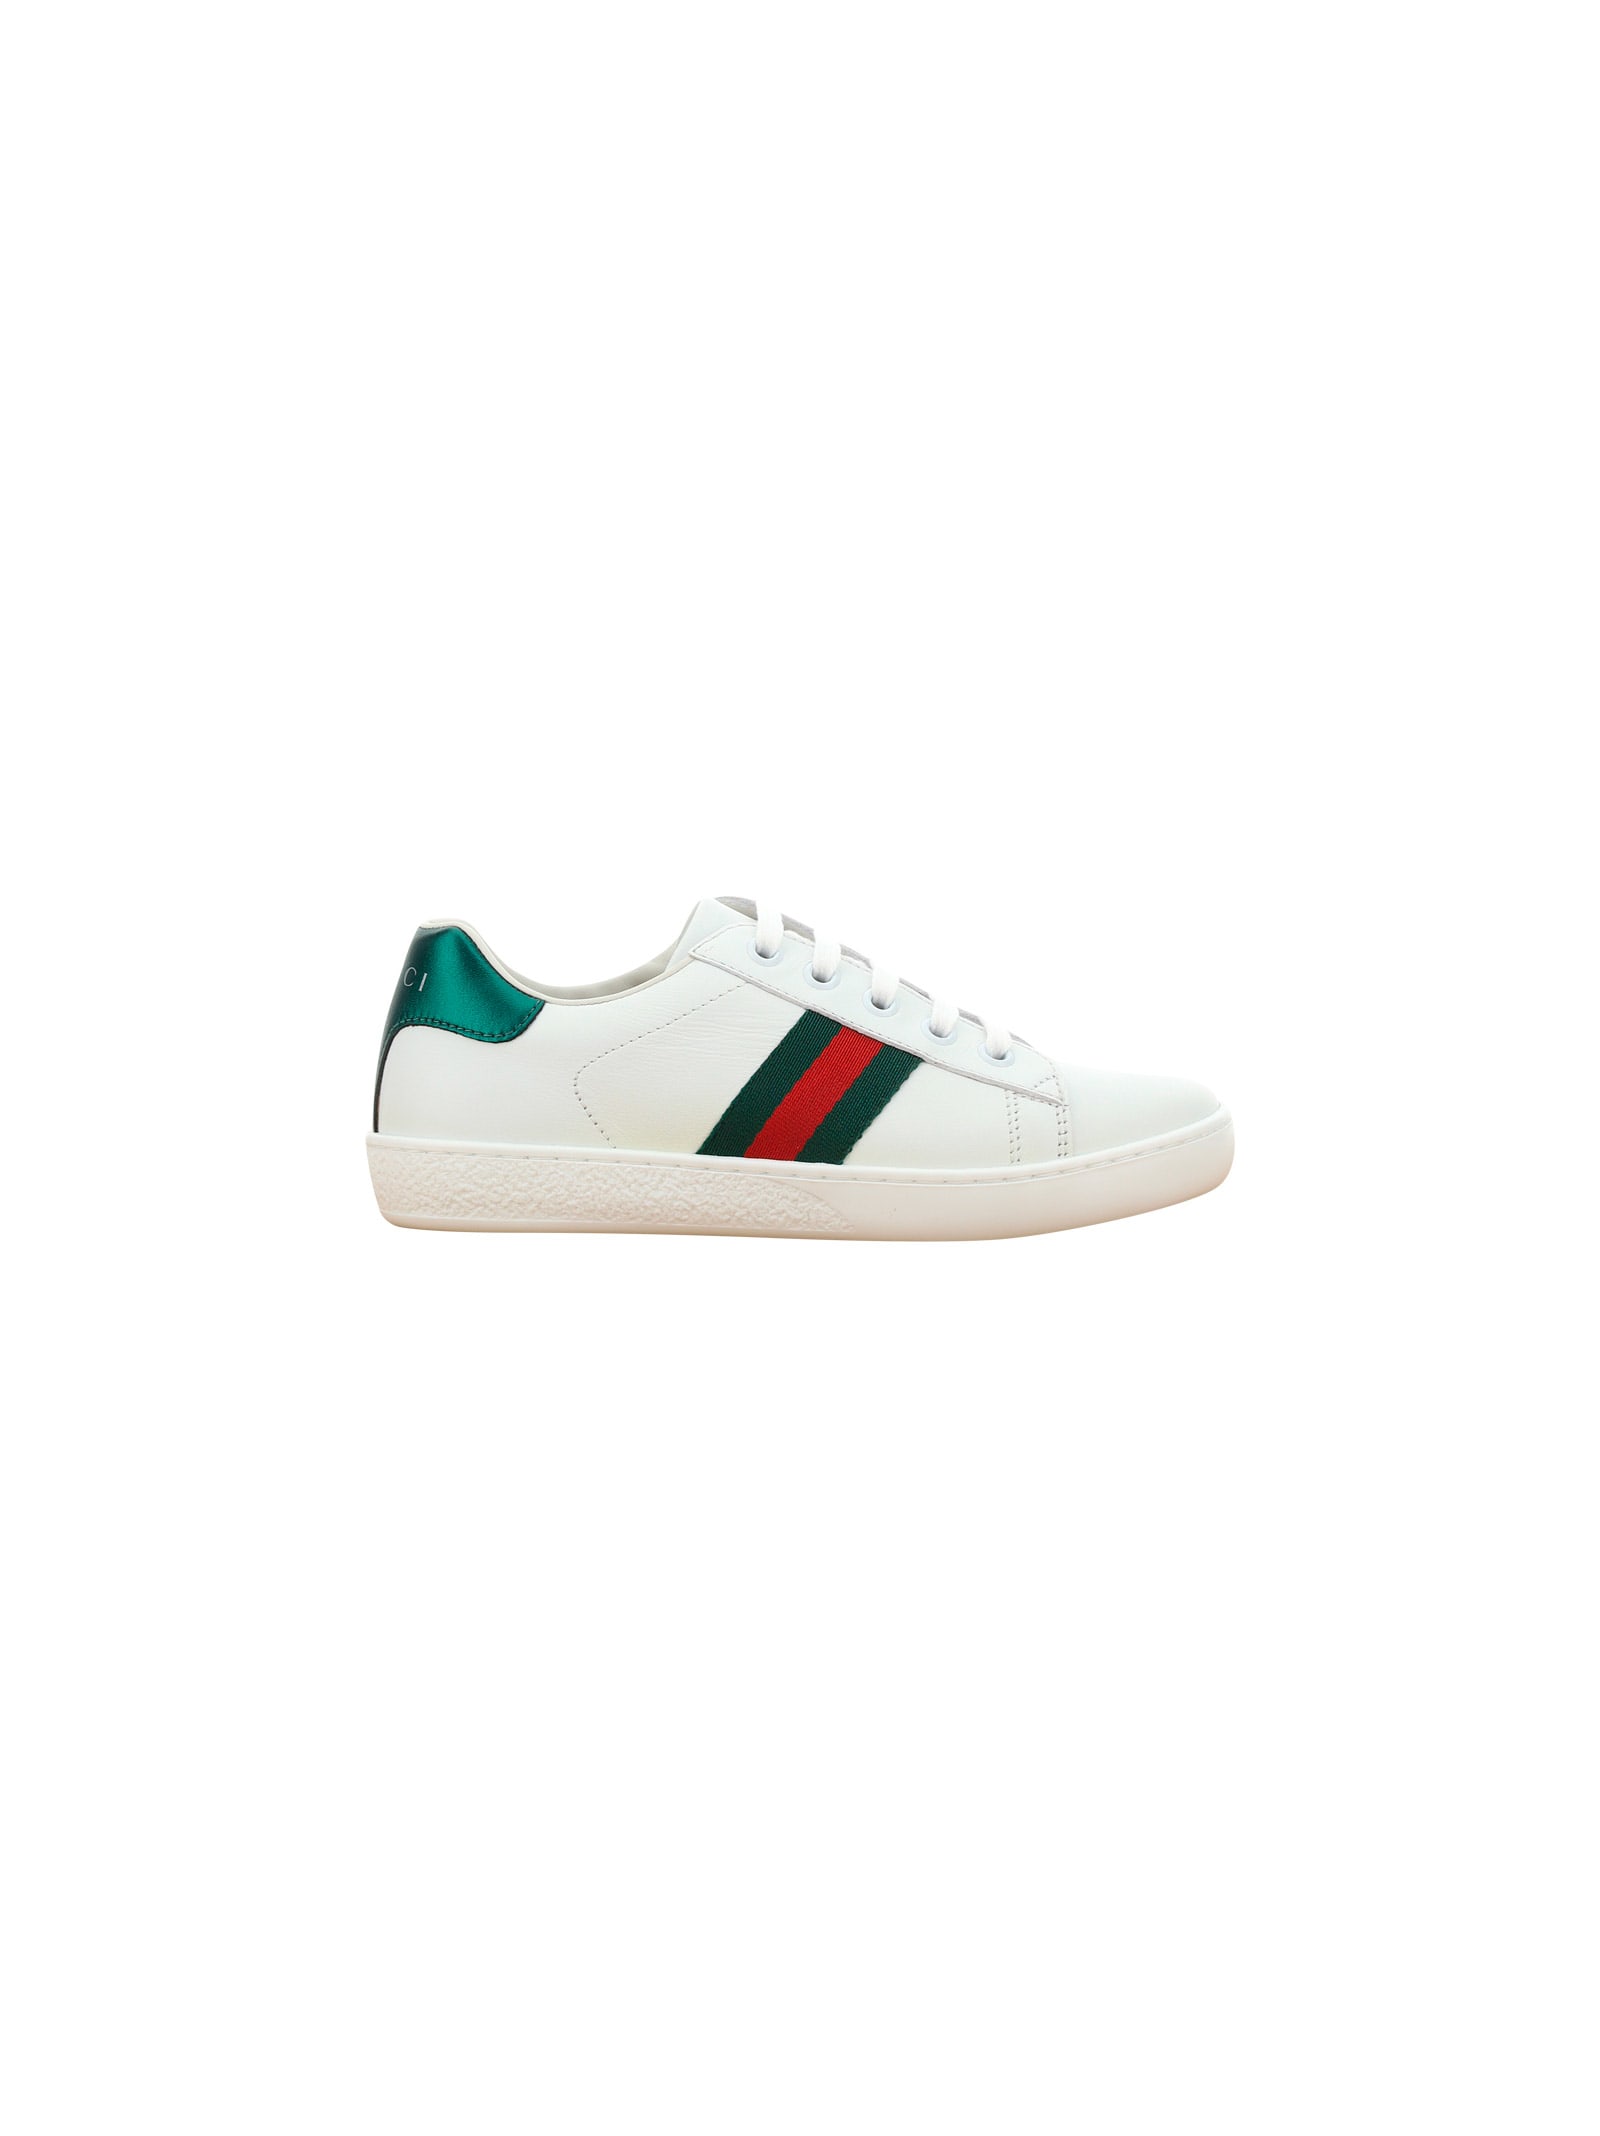 Gucci Kids' Ace Sneakers For Boy In White